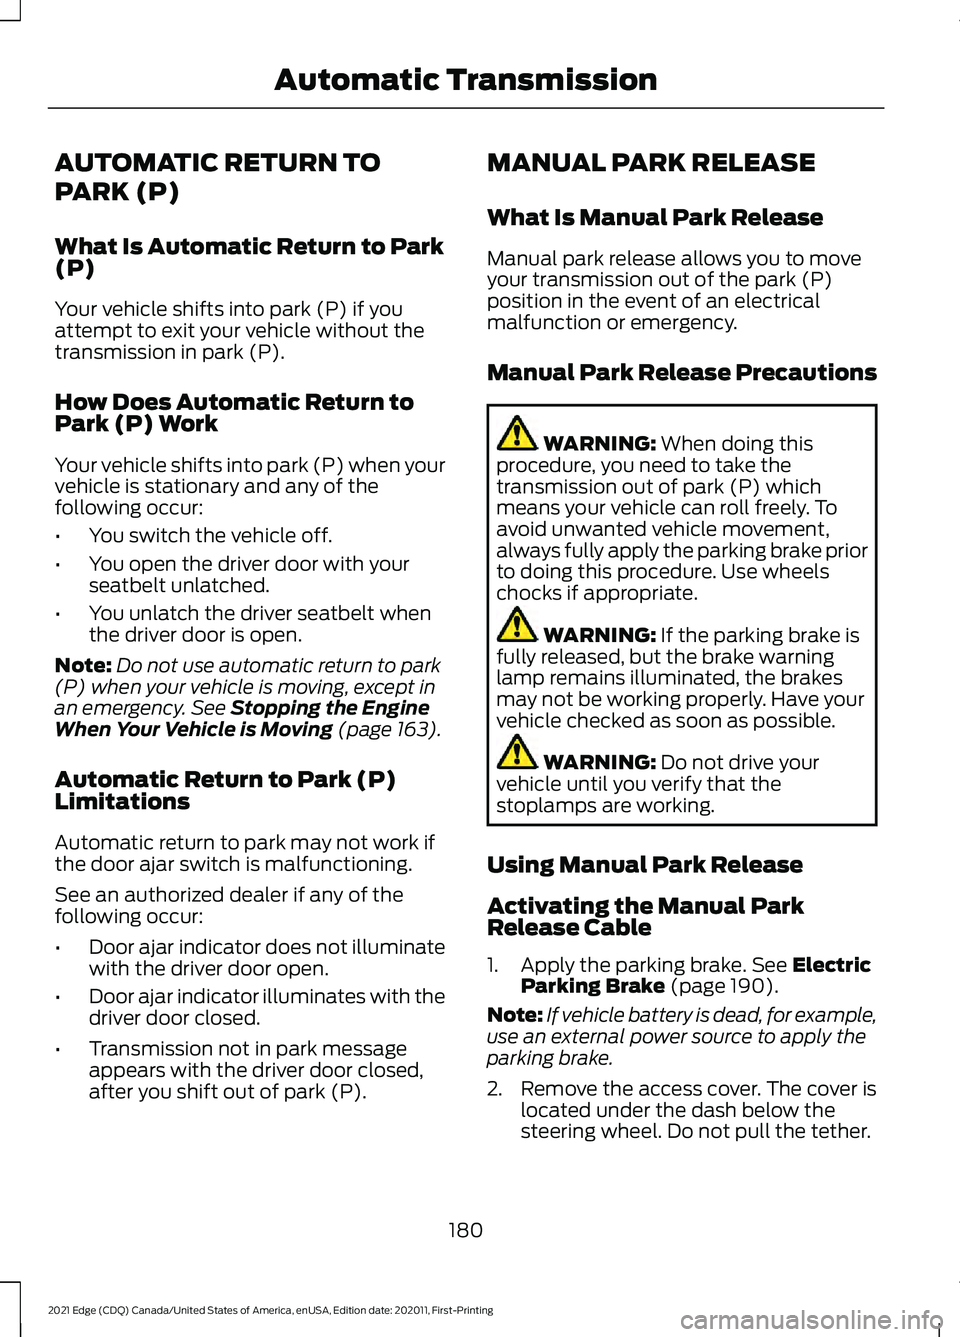 FORD EDGE 2021  Owners Manual AUTOMATIC RETURN TO
PARK (P)
What Is Automatic Return to Park
(P)
Your vehicle shifts into park (P) if you
attempt to exit your vehicle without the
transmission in park (P).
How Does Automatic Return 